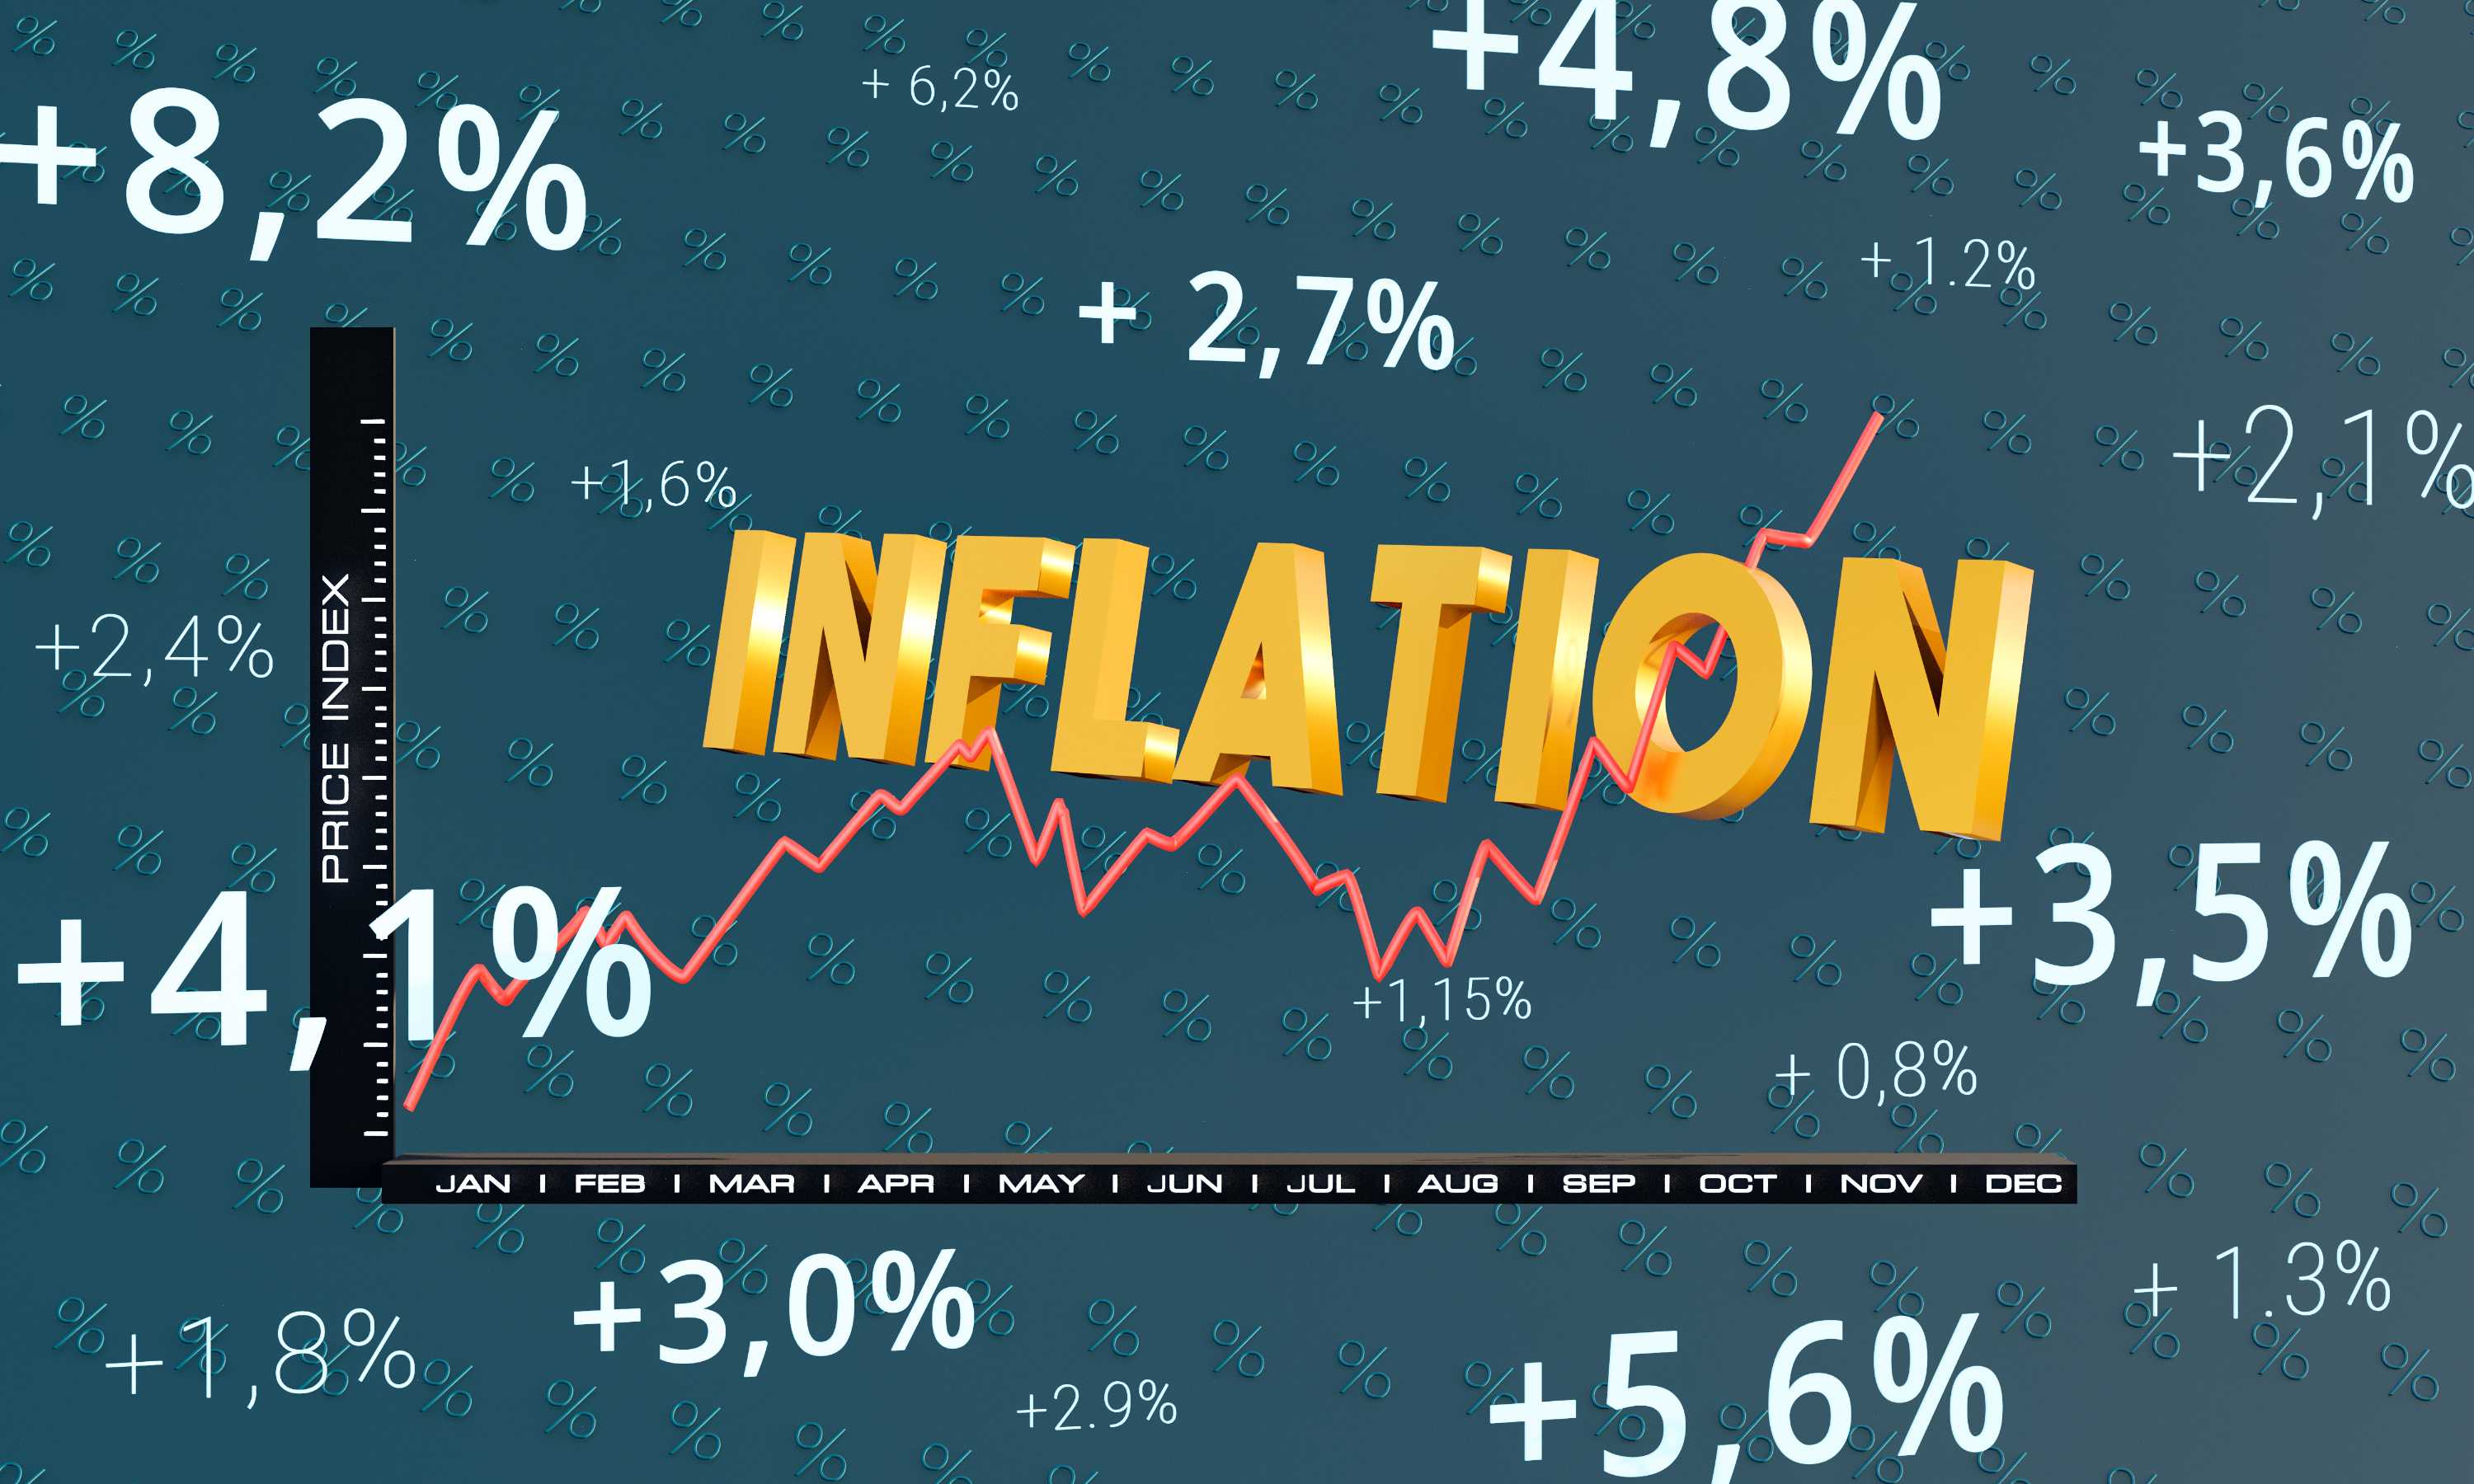 The economics of Inflation—Science, Craft, or Snake Oil